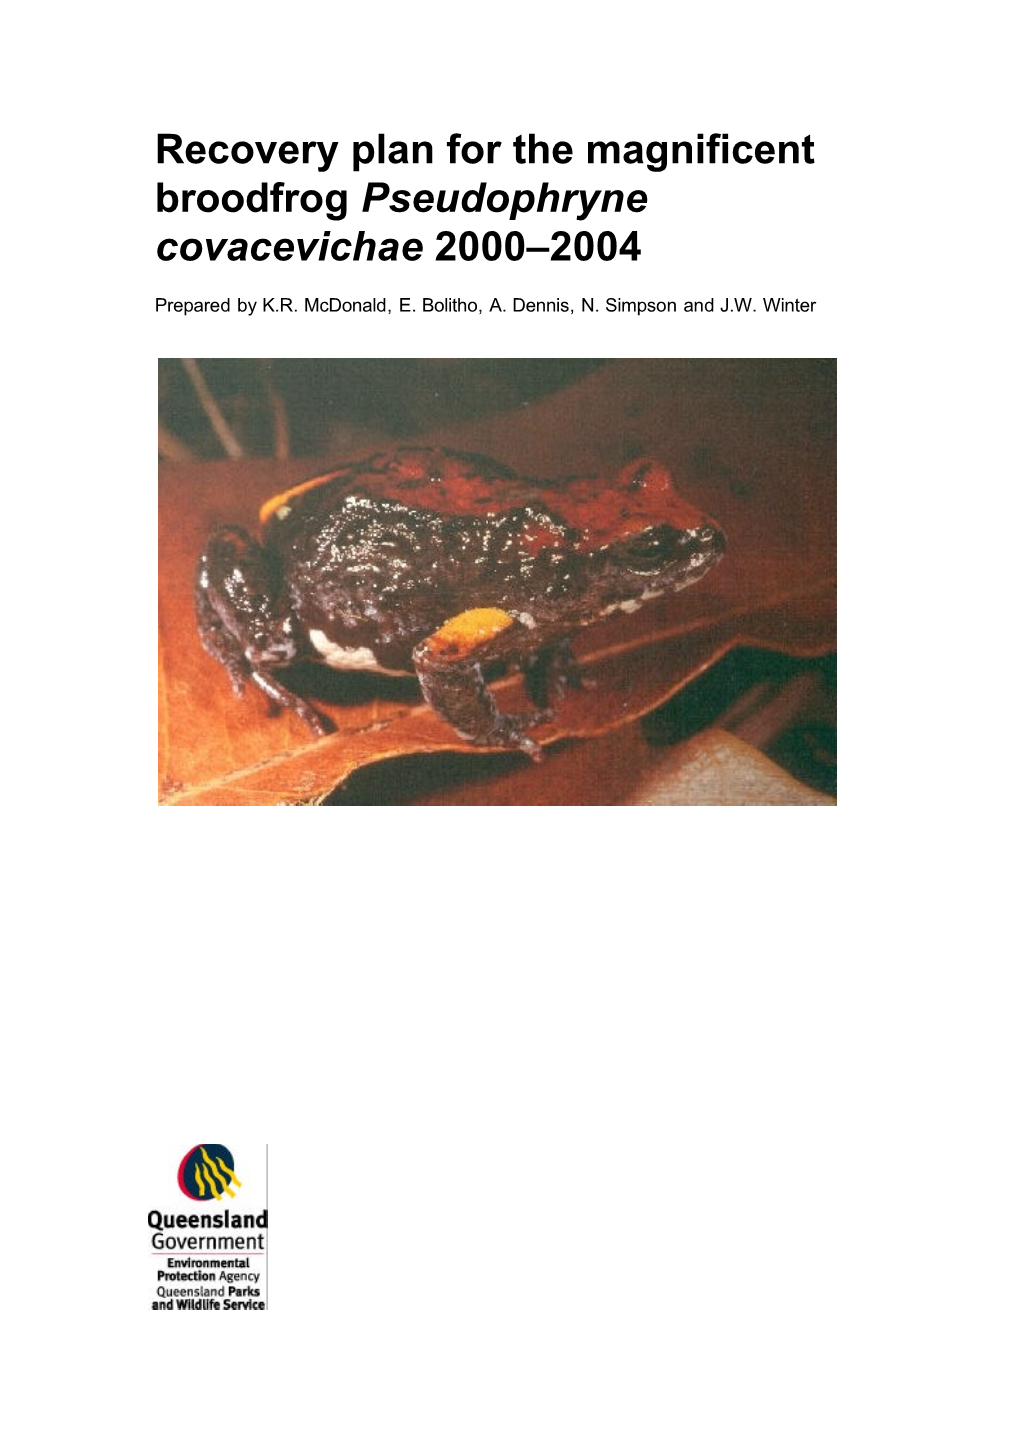 Recovery Plan for the Magnificent Broodfrog Pseudophryne Covacevichae 2000-2004